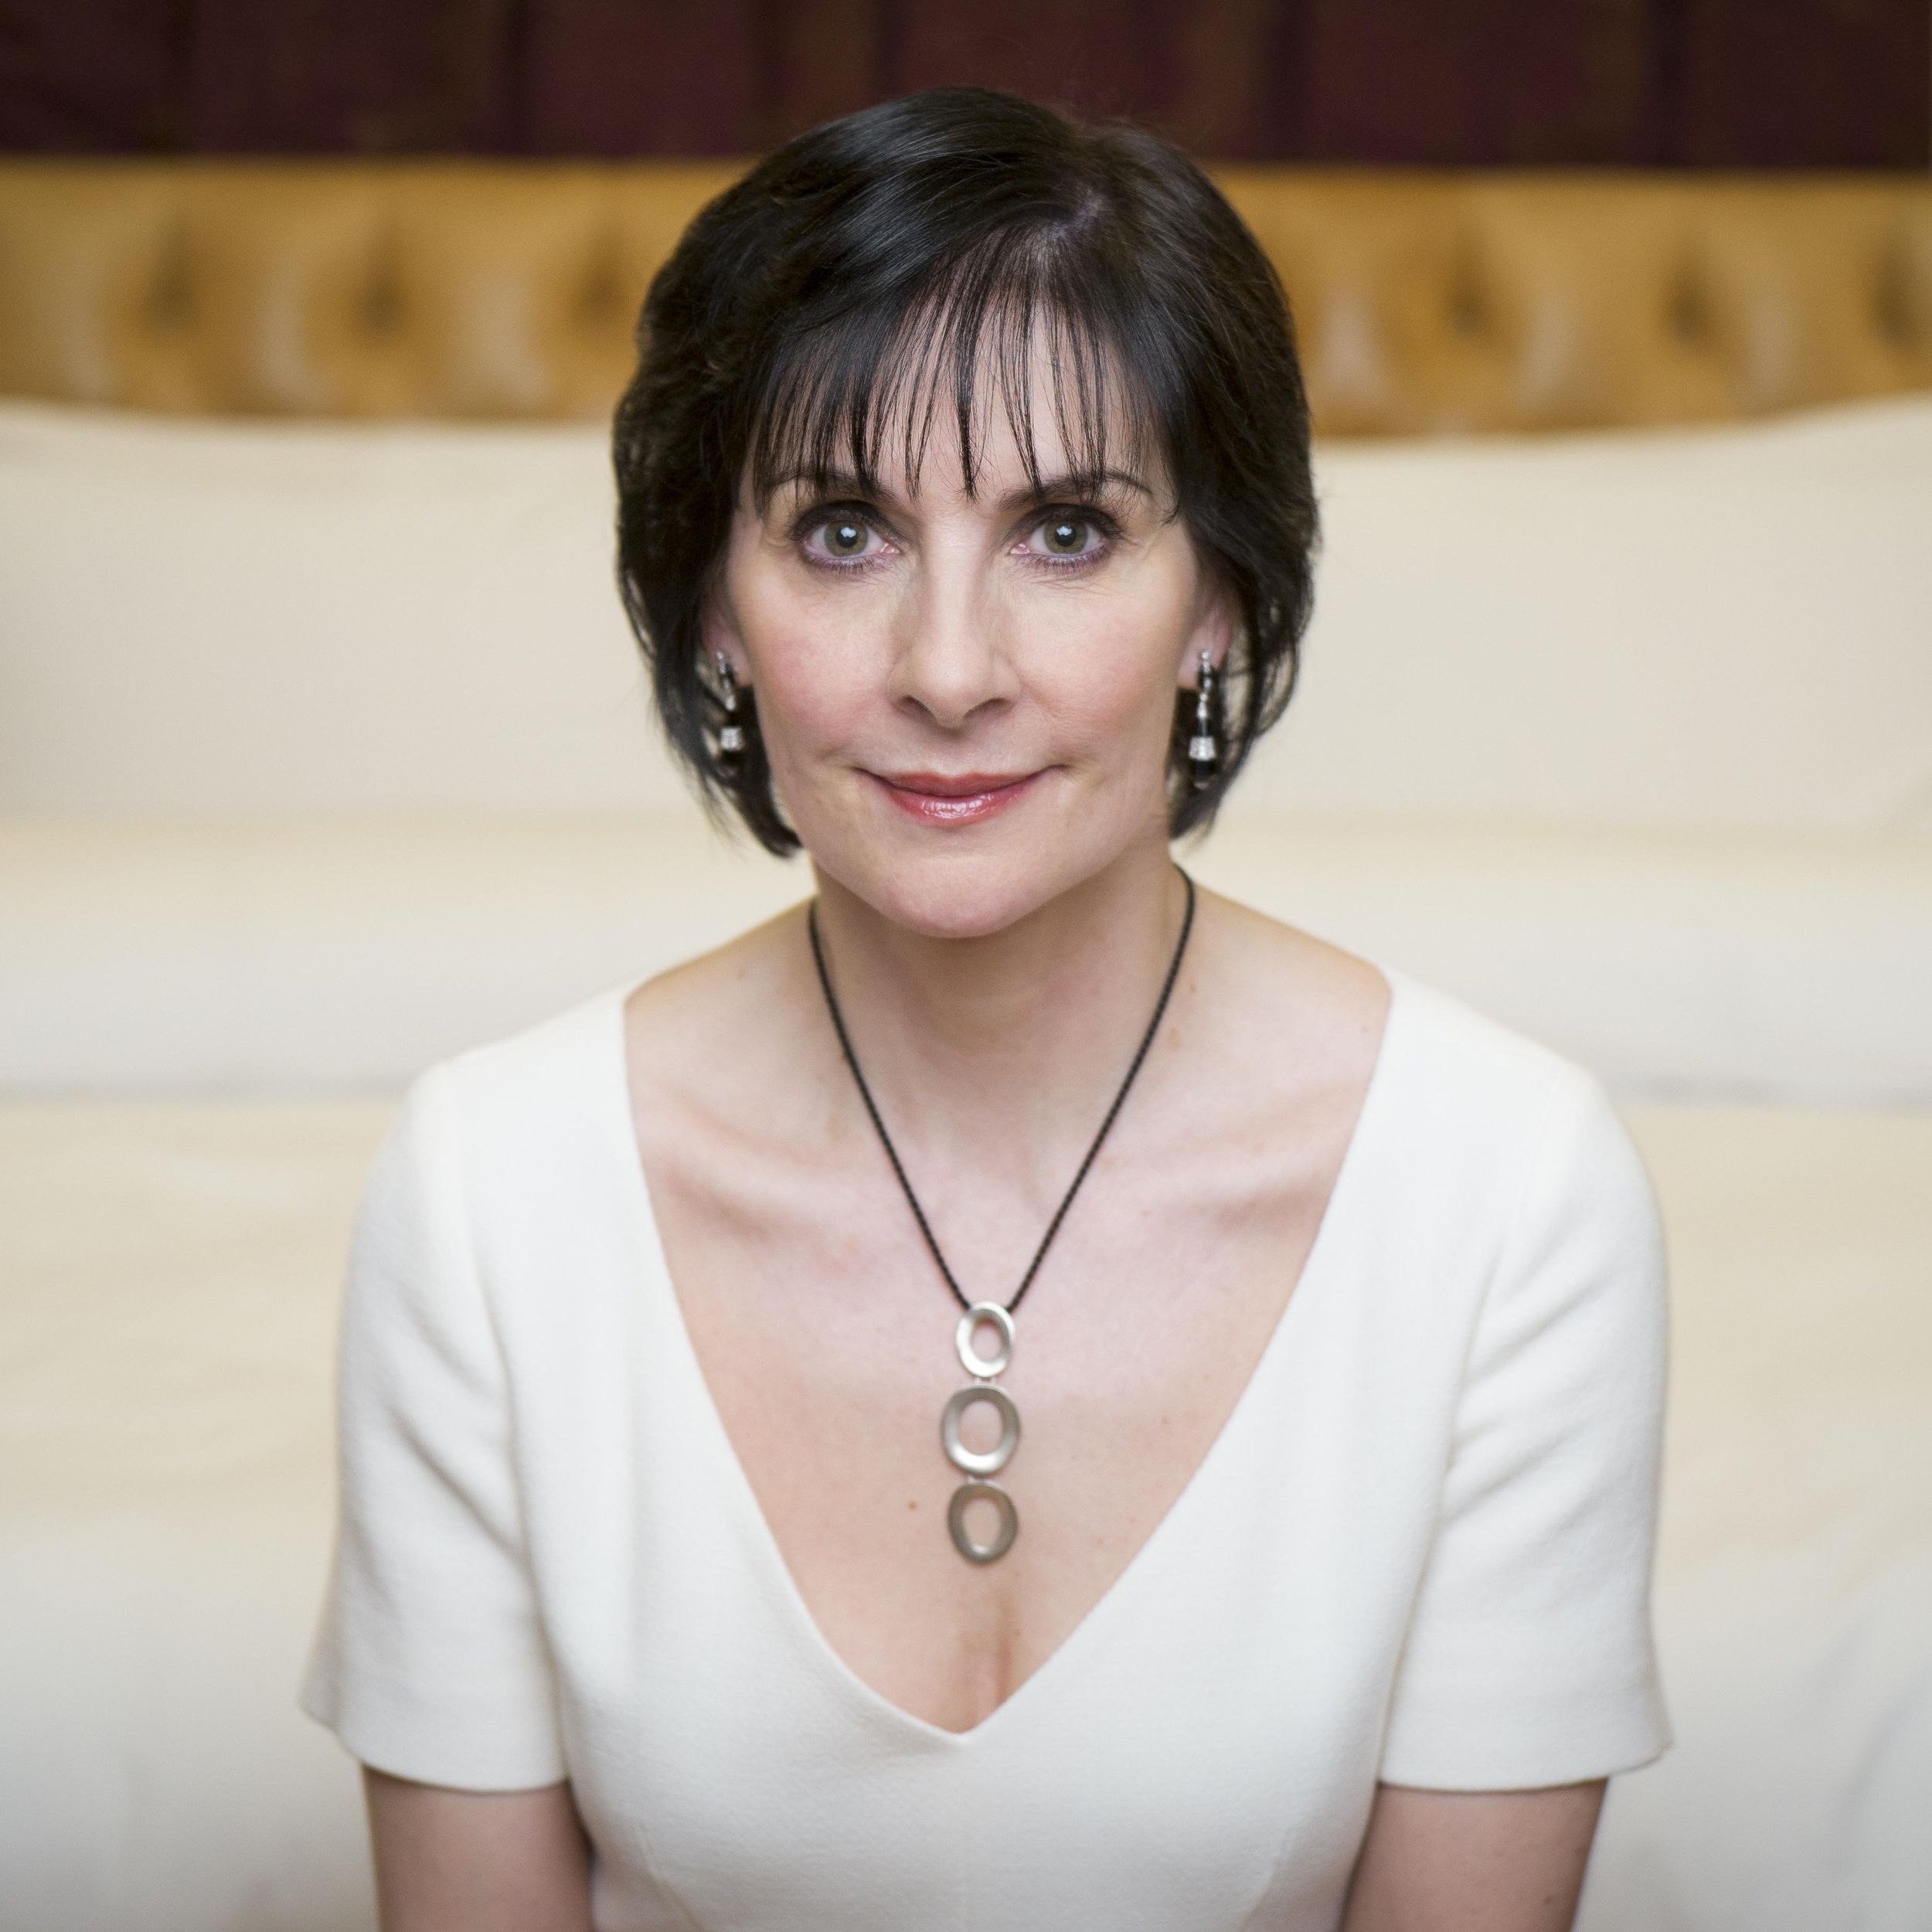 Enya returns with ethereal style she&#39;s made her own | The Spokesman-Review